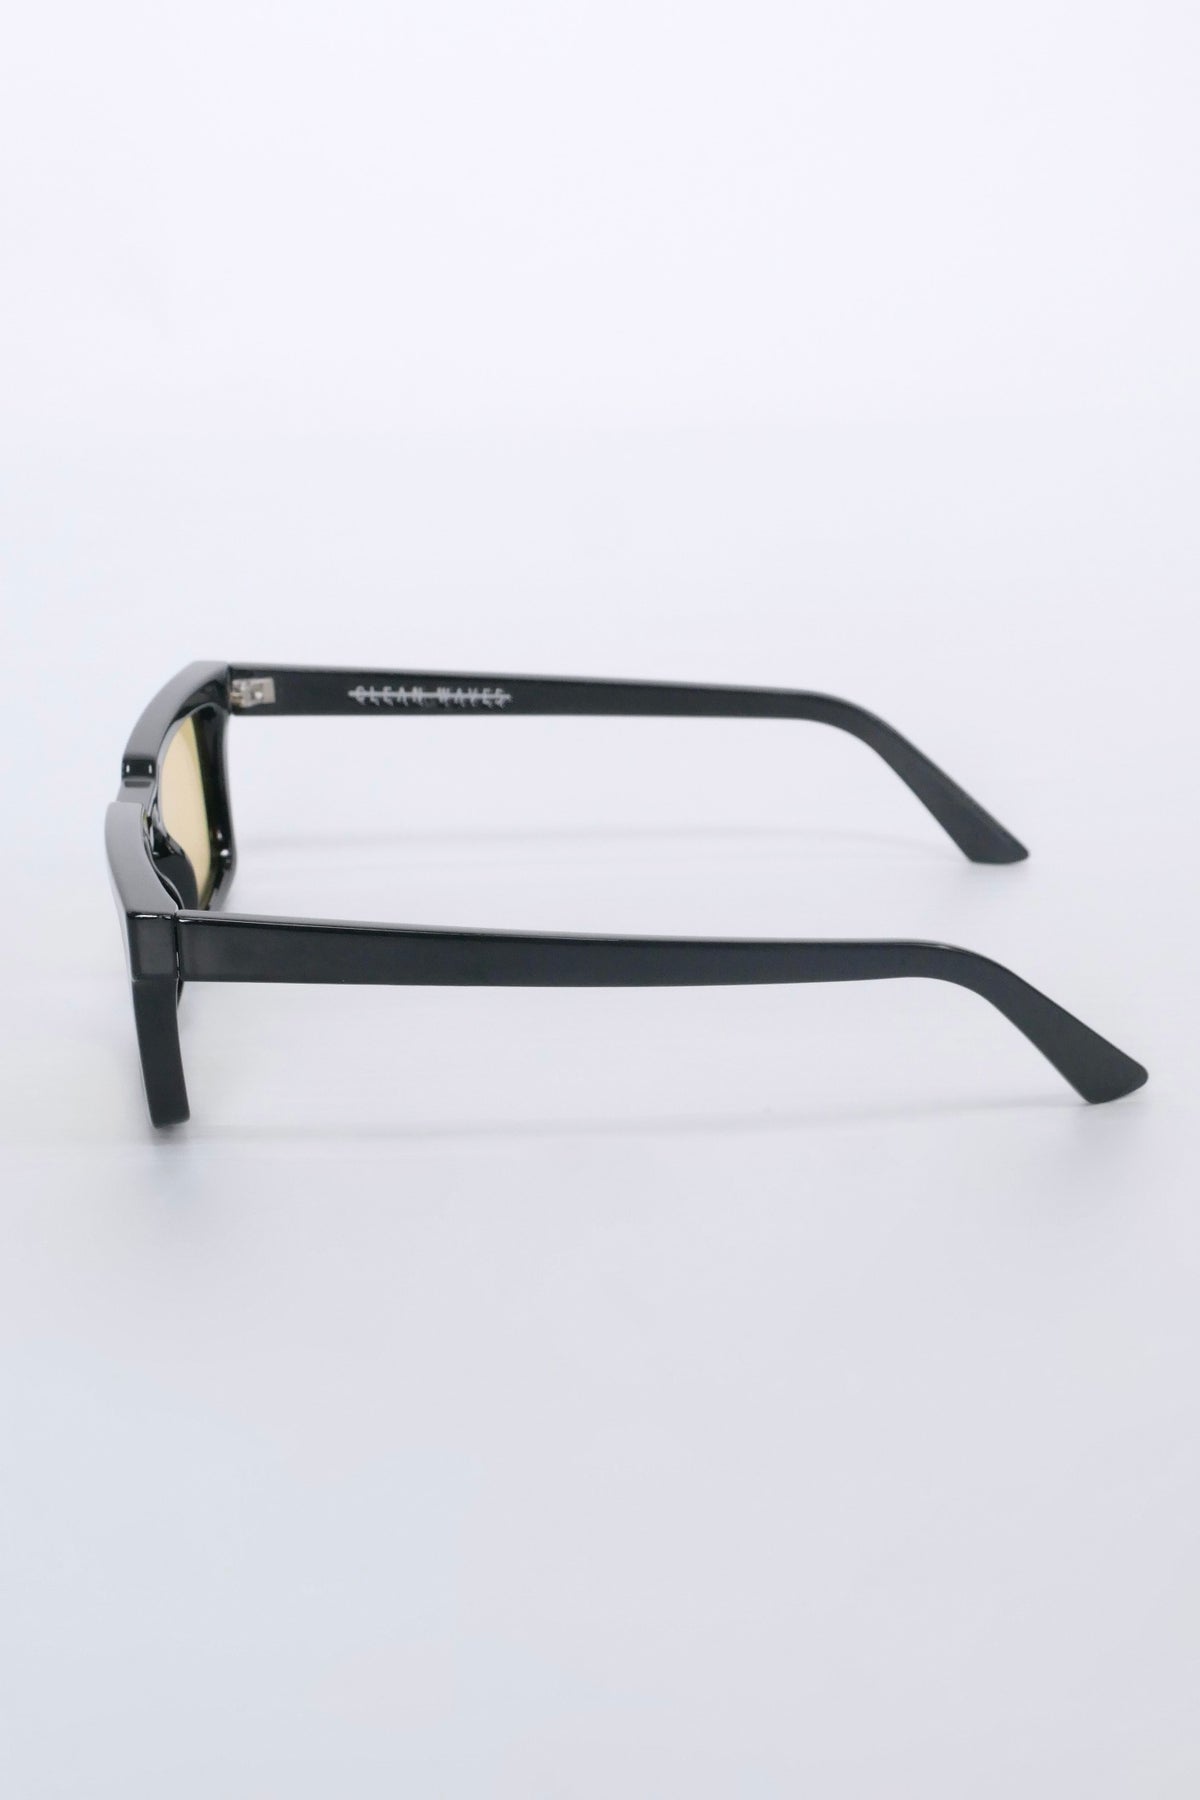 Clean Waves Type 02 Low Sunglasses - Black/Yellow